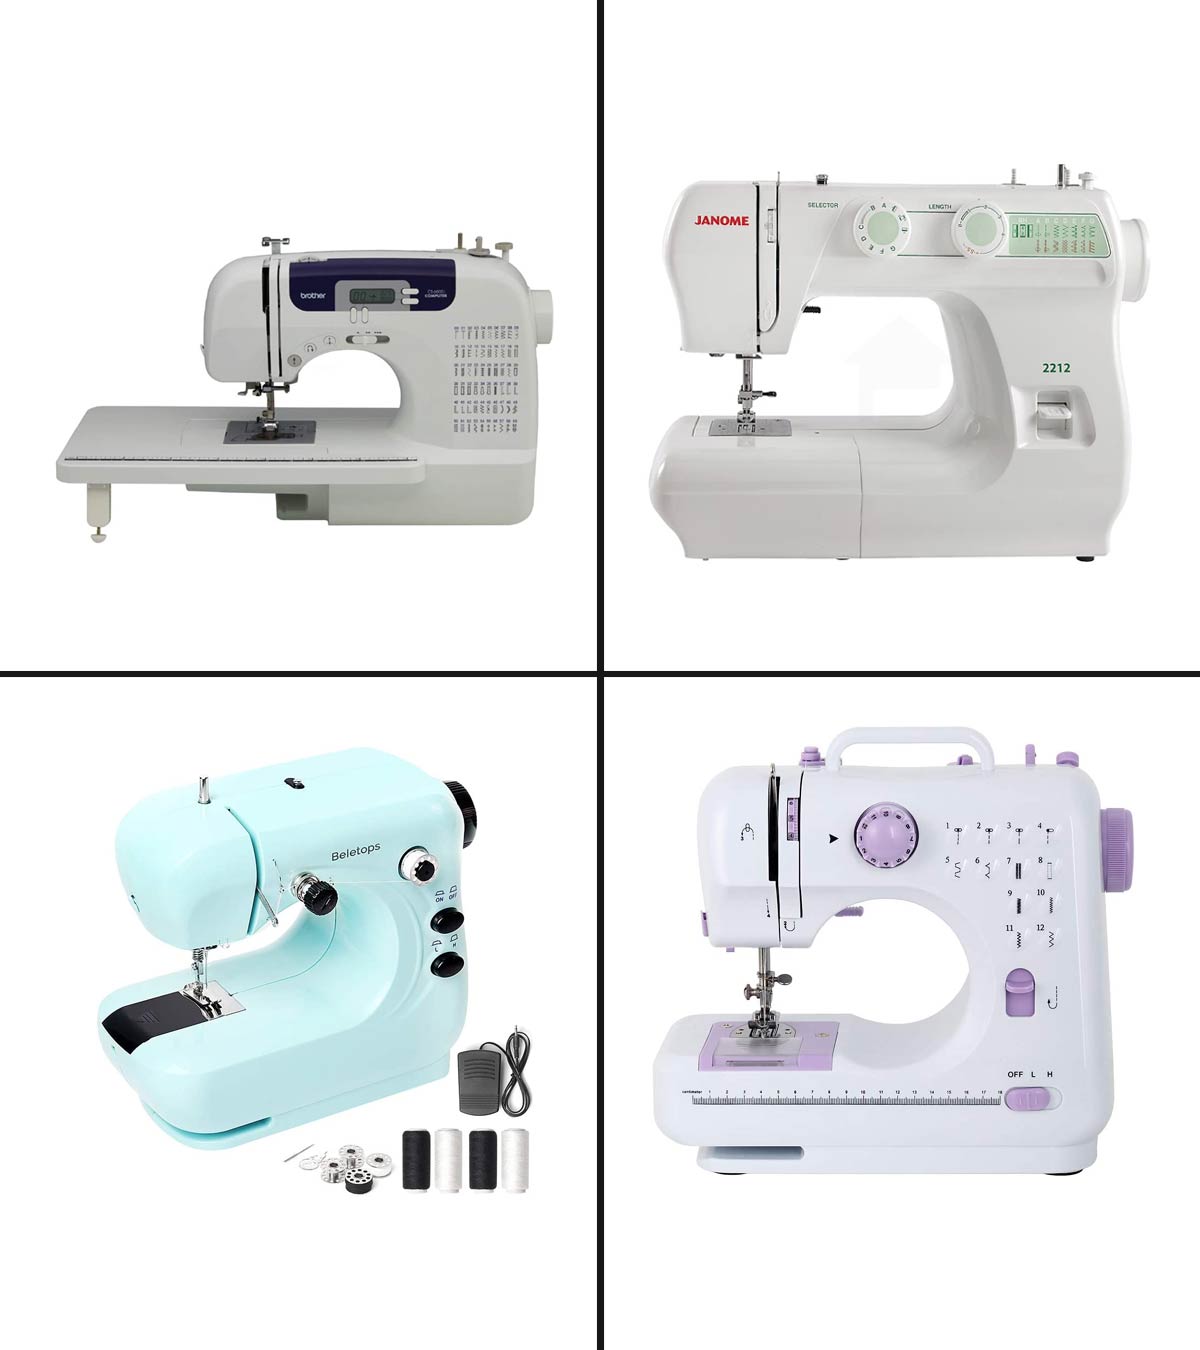 Best Sewing Machine for Kids. Kids no longer struggle to learn the